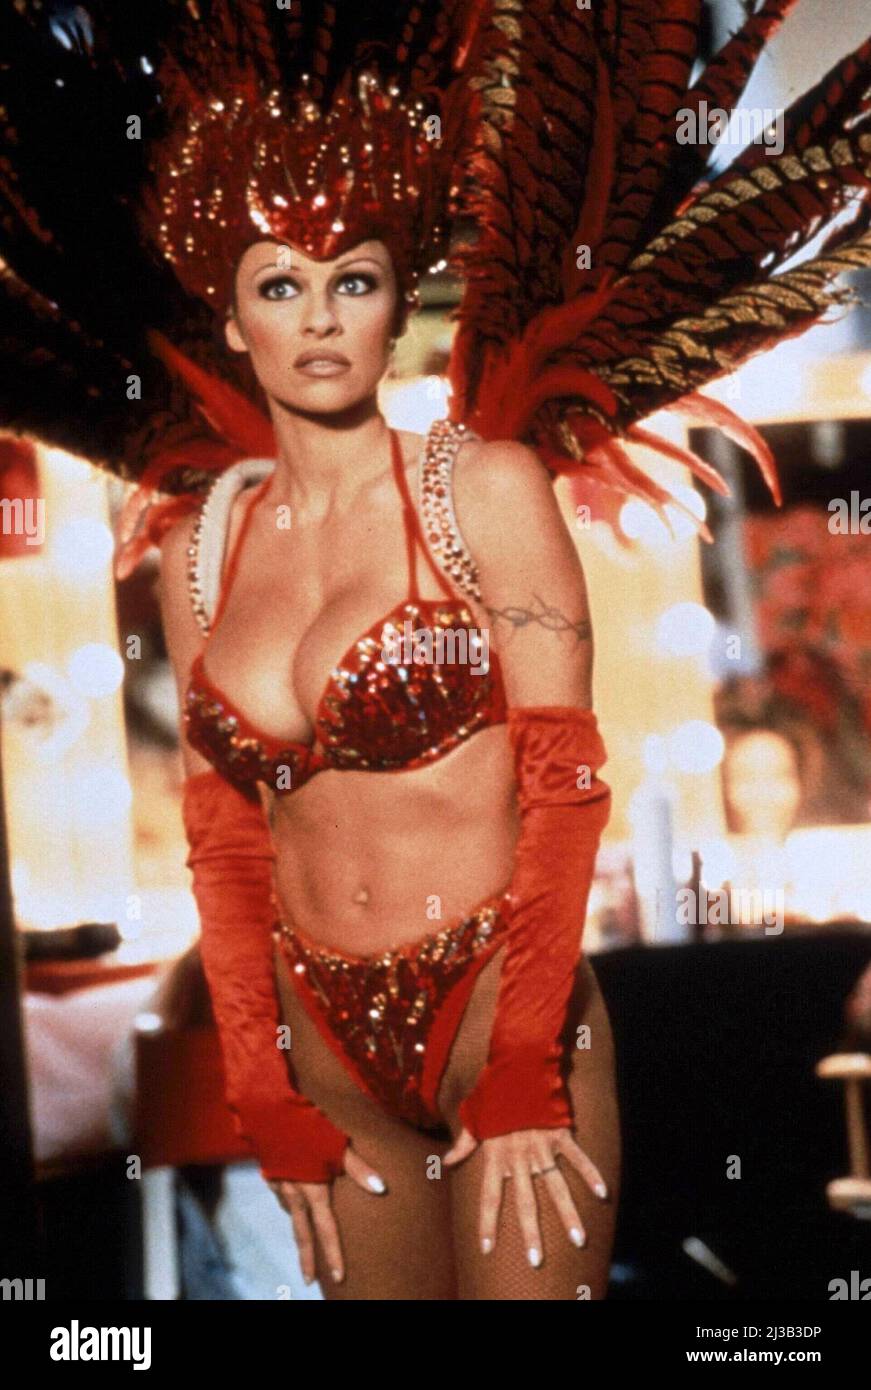 PAMELA ANDERSON in V. I. P. (1998), directed by J. F. LAWTON. Credit: Sony Pictures Television / Album Stock Photo